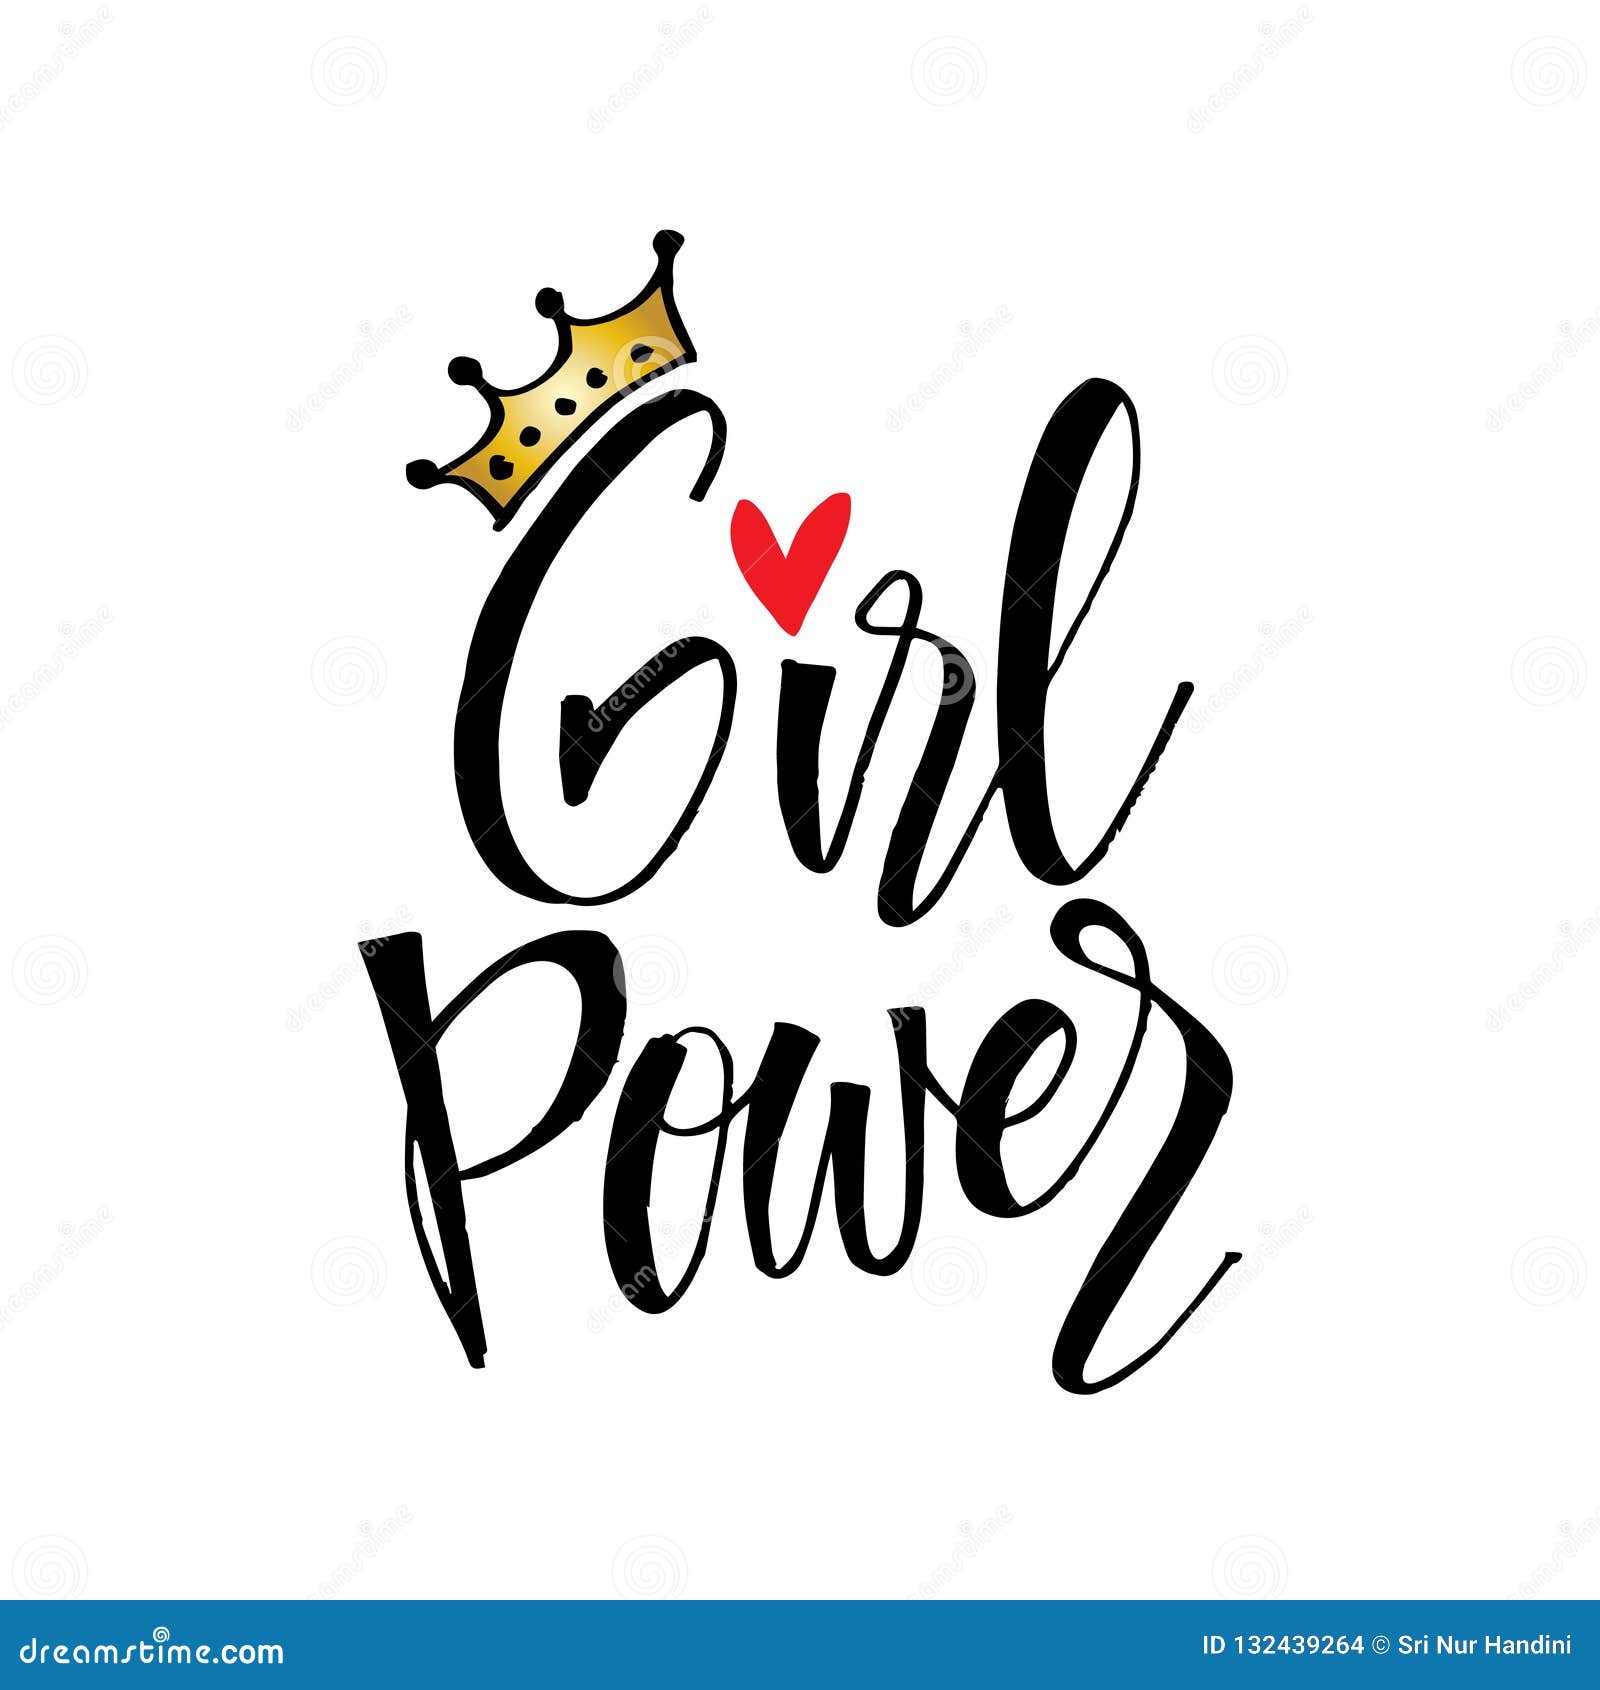 girl power images